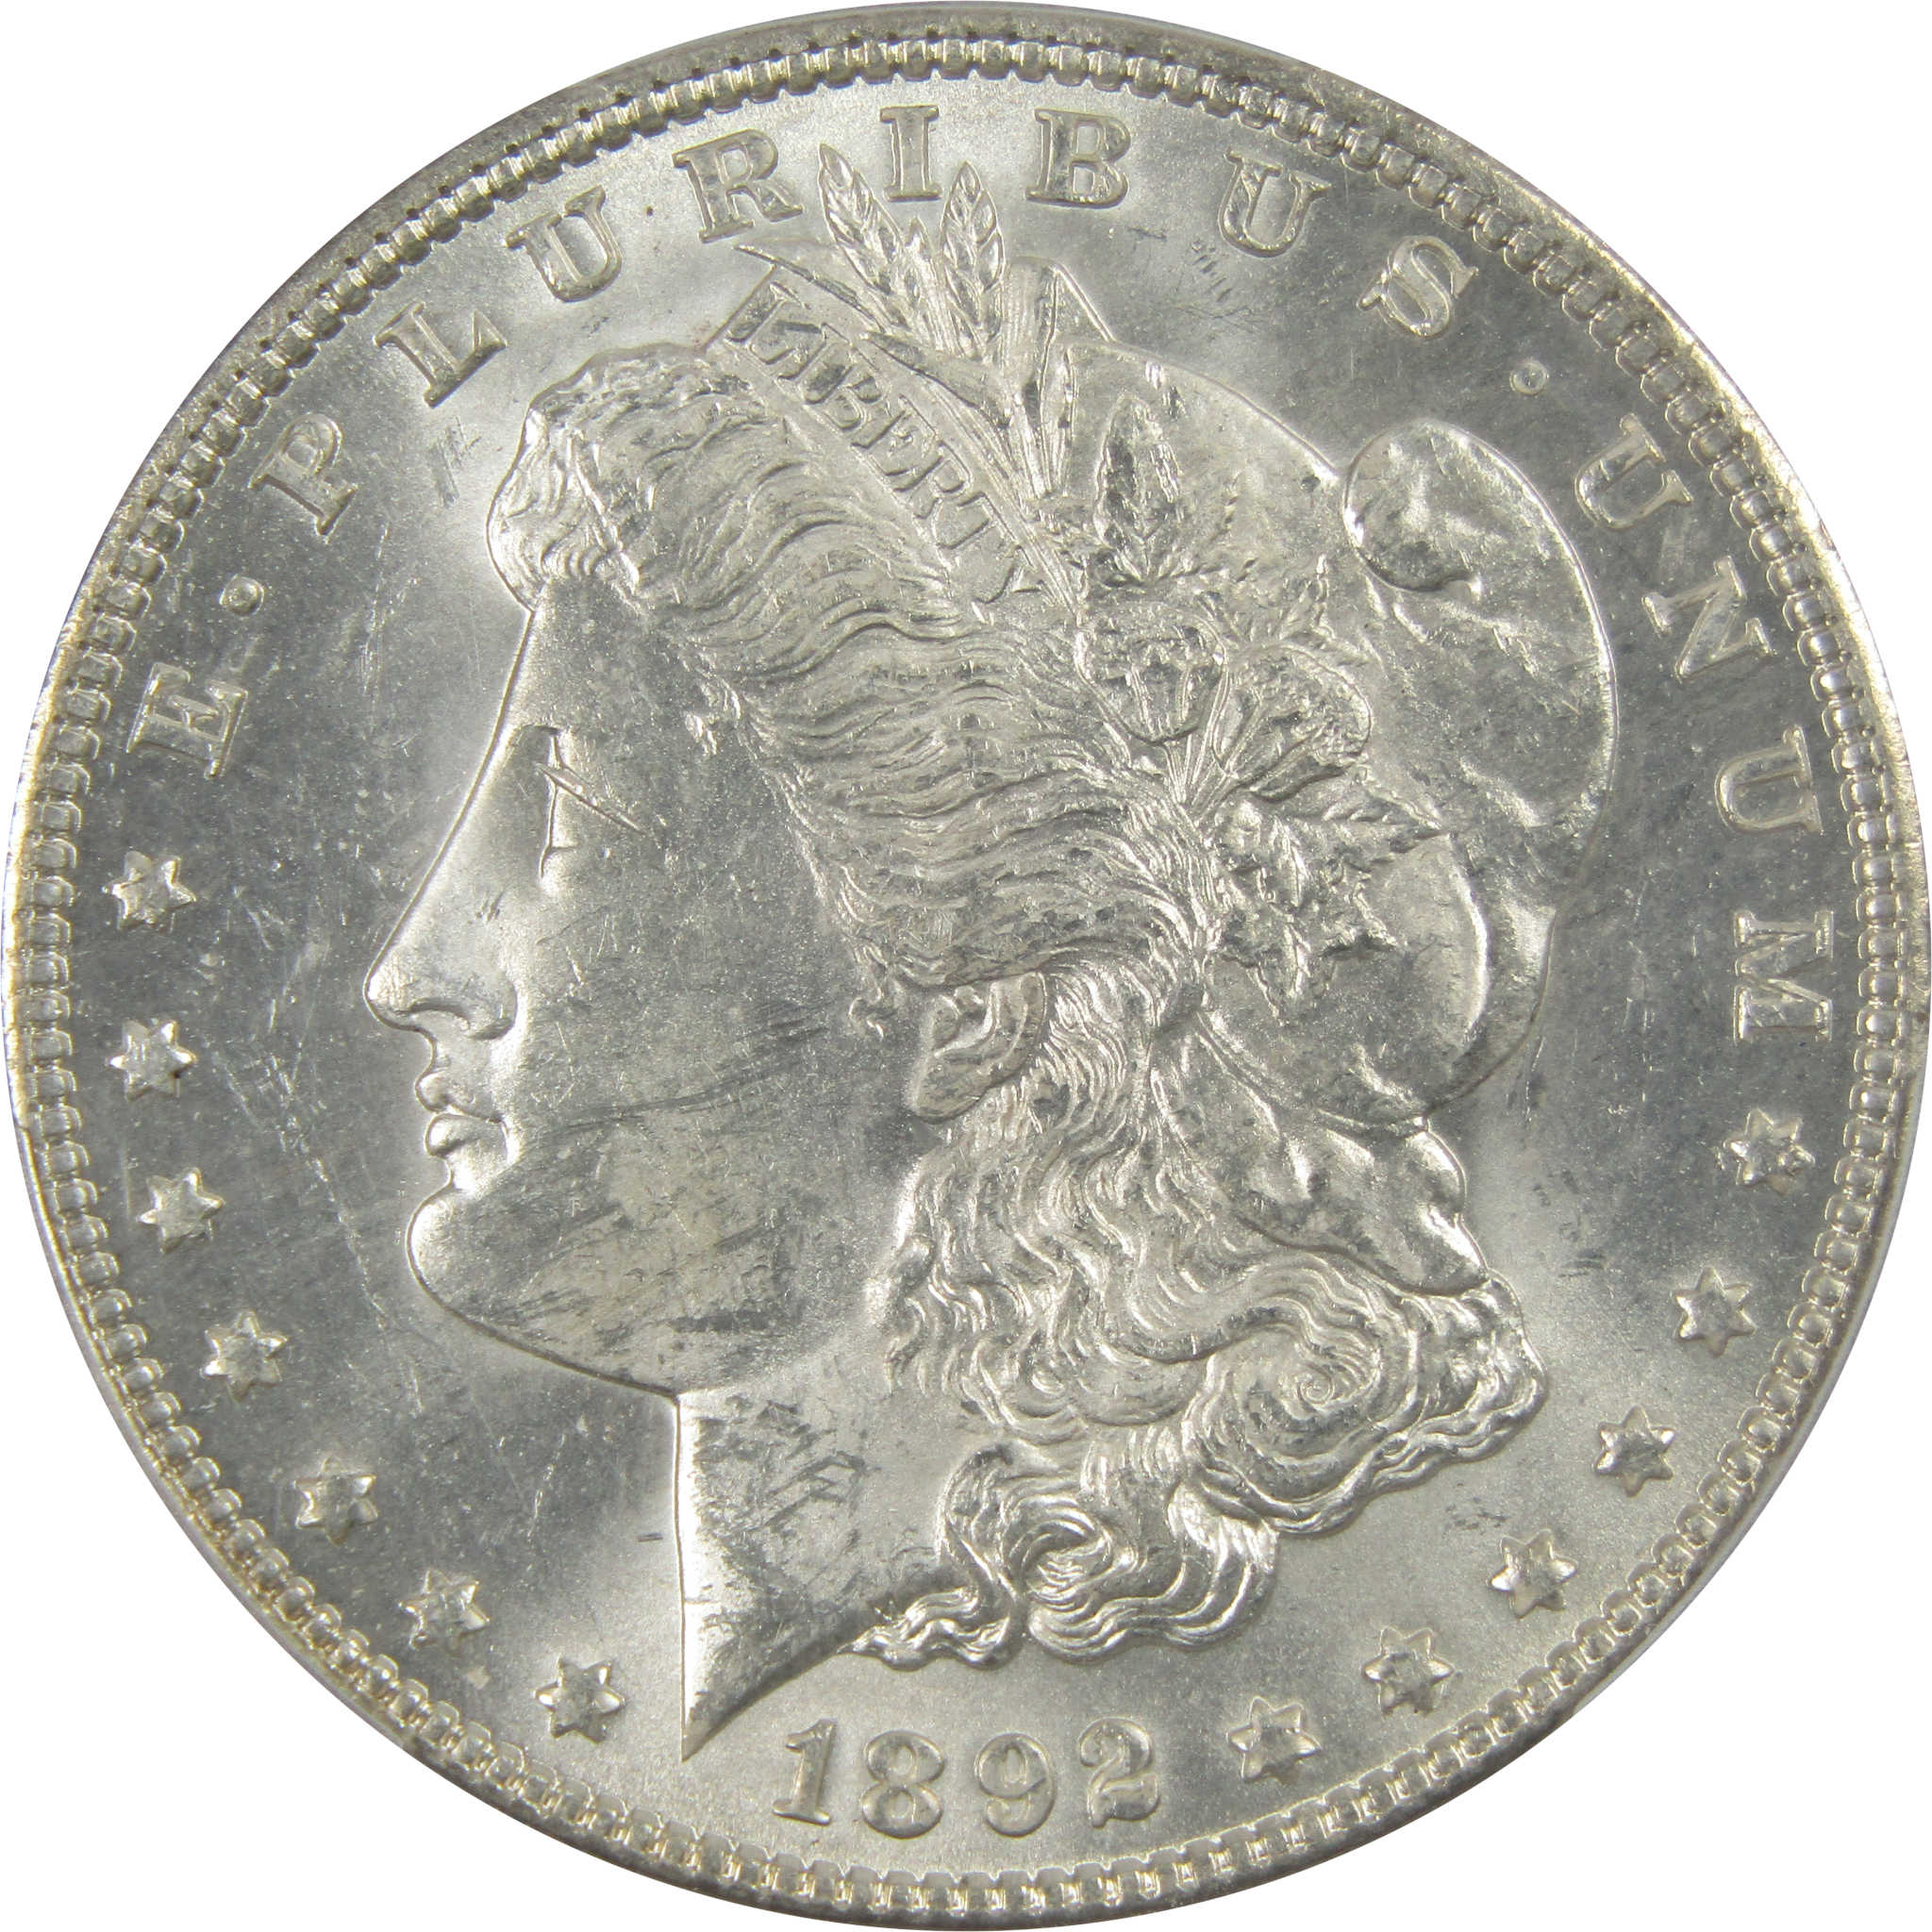 1892 O Morgan Dollar MS 62 PCGS 90% Silver $1 Uncirculated SKU:I7045 - Morgan coin - Morgan silver dollar - Morgan silver dollar for sale - Profile Coins &amp; Collectibles